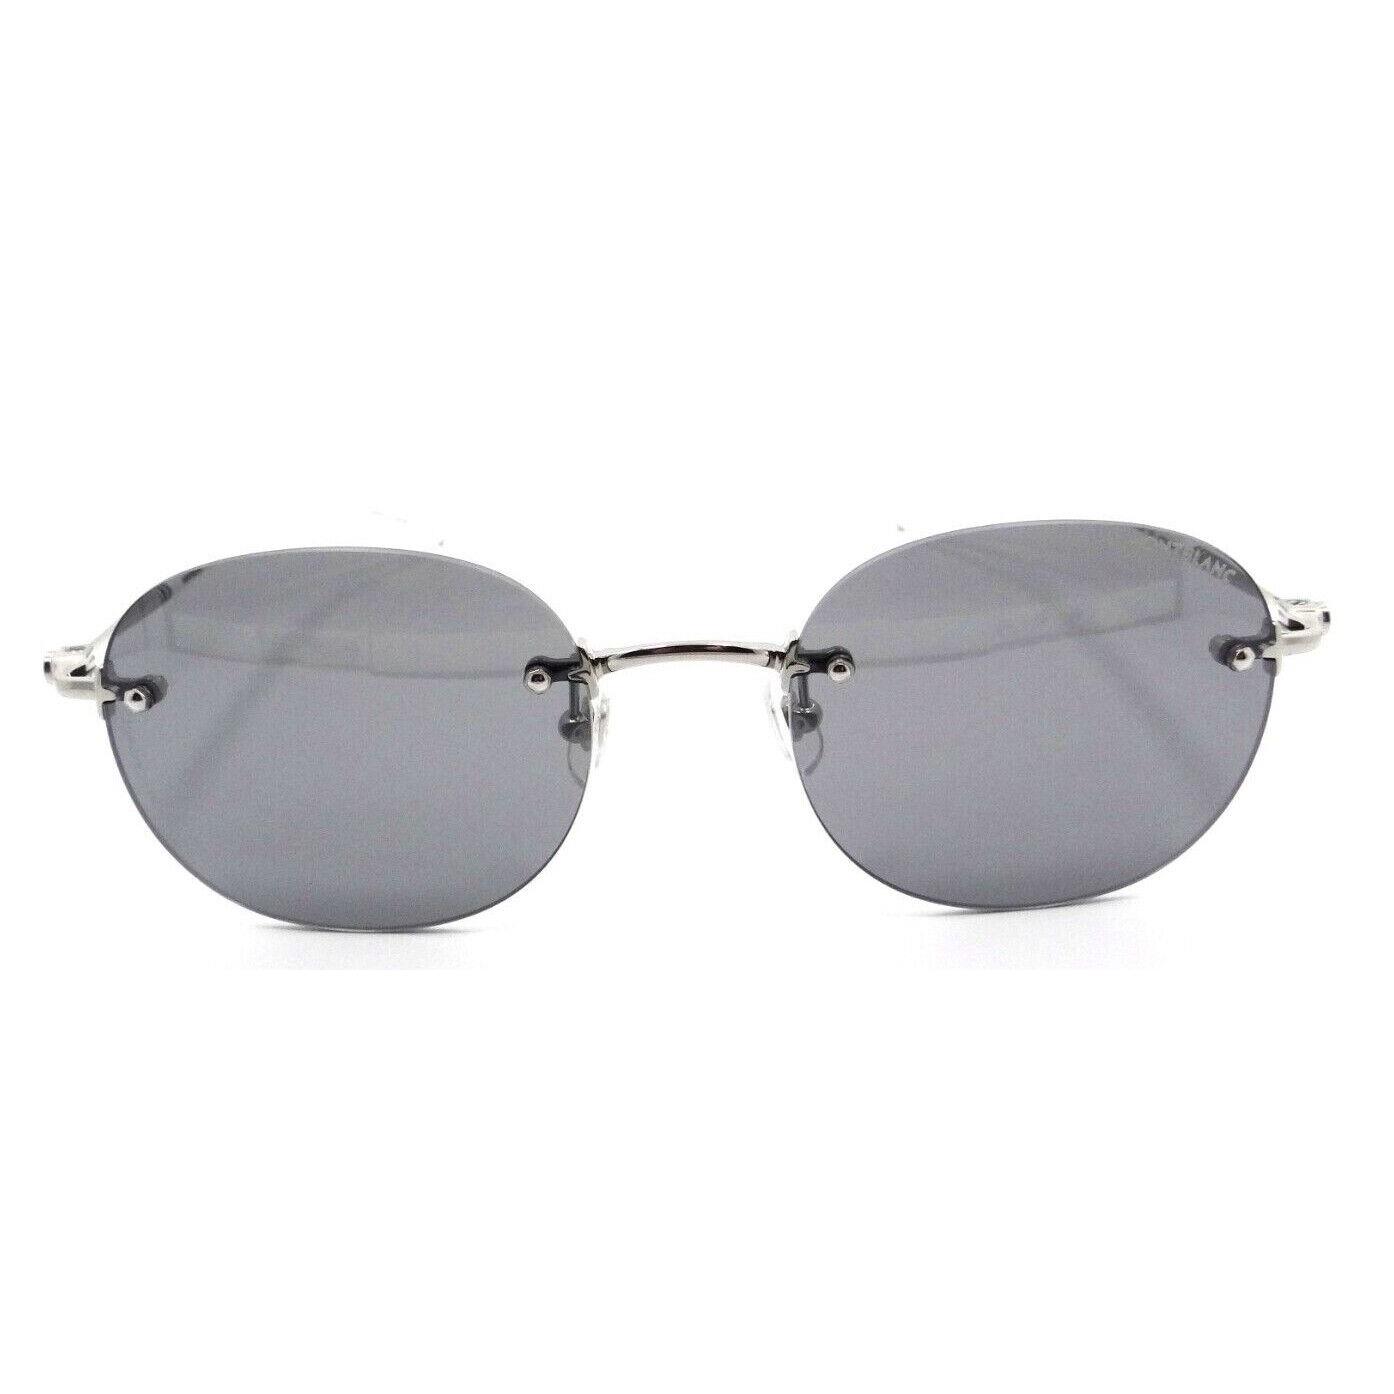 Montblanc Sunglasses MB0126S 010 54-21-145 Silver / Grey Made in Japan